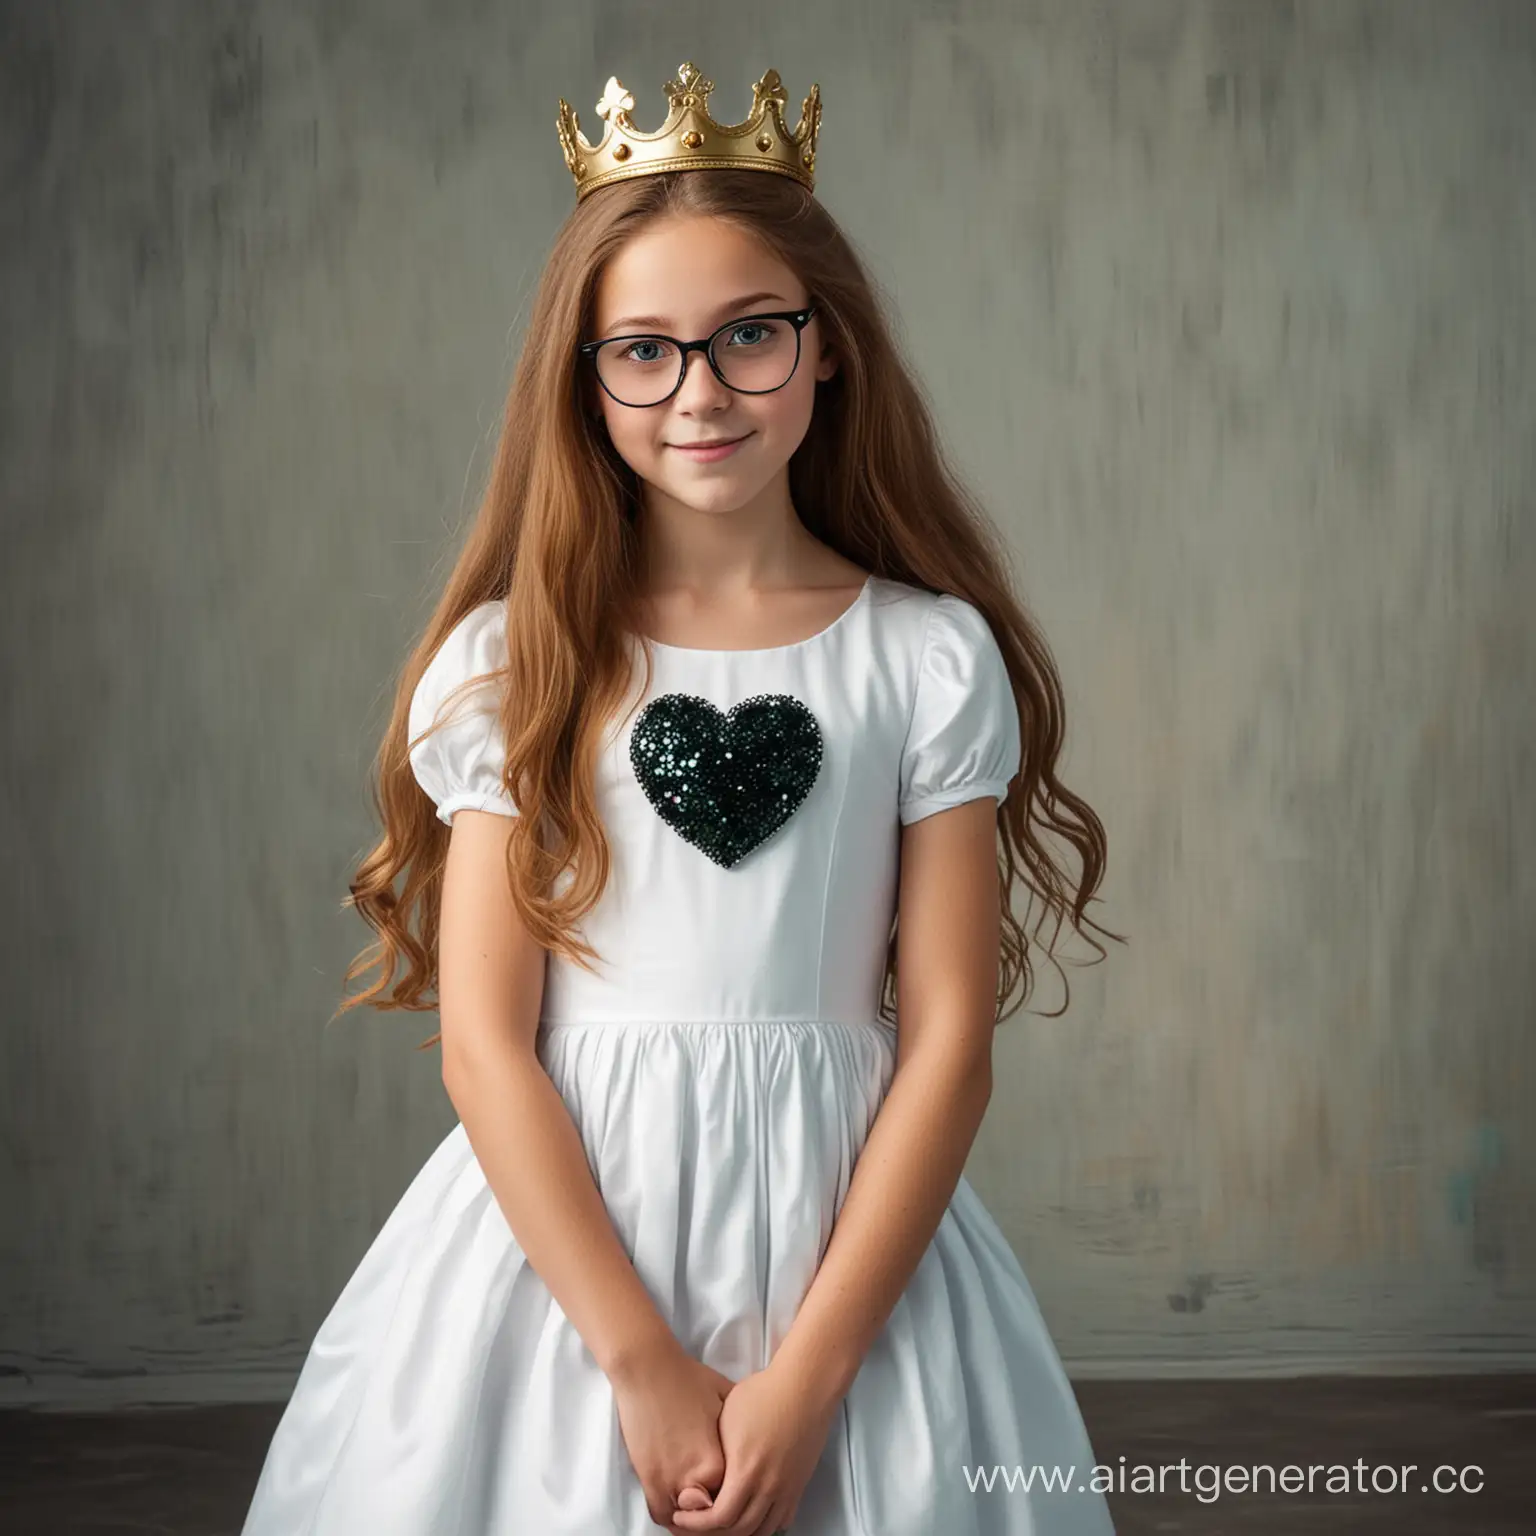 Teenage-Princess-with-Chestnut-Hair-and-Heart-Glasses